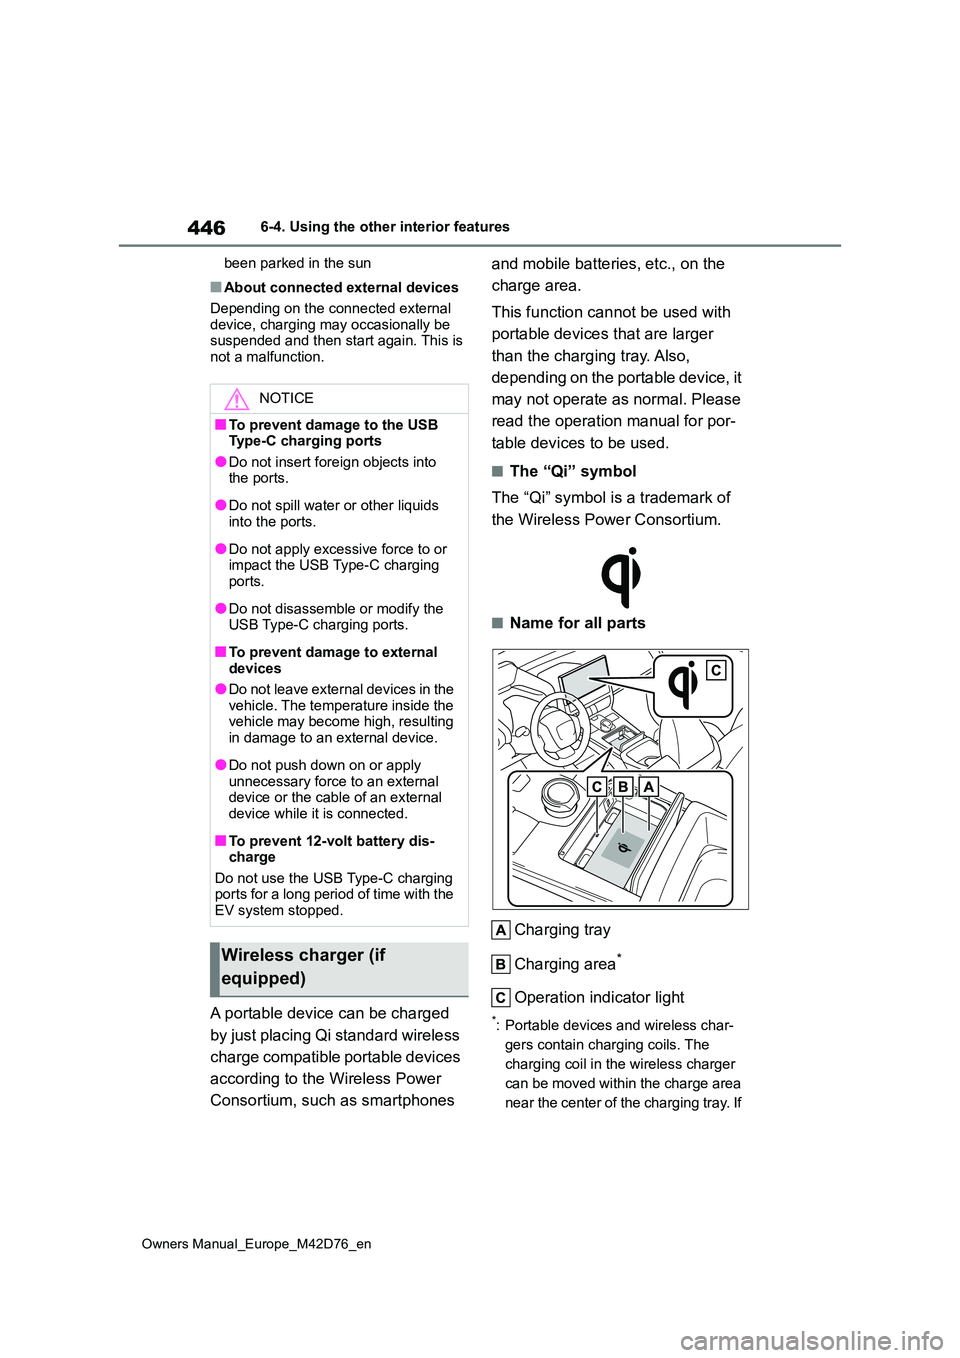 TOYOTA BZ4X 2022  Owners Manual (in English) 446
Owners Manual_Europe_M42D76_en
6-4. Using the other interior features 
been parked in the sun
■About connected external devices 
Depending on the connected external  device, charging may occasio